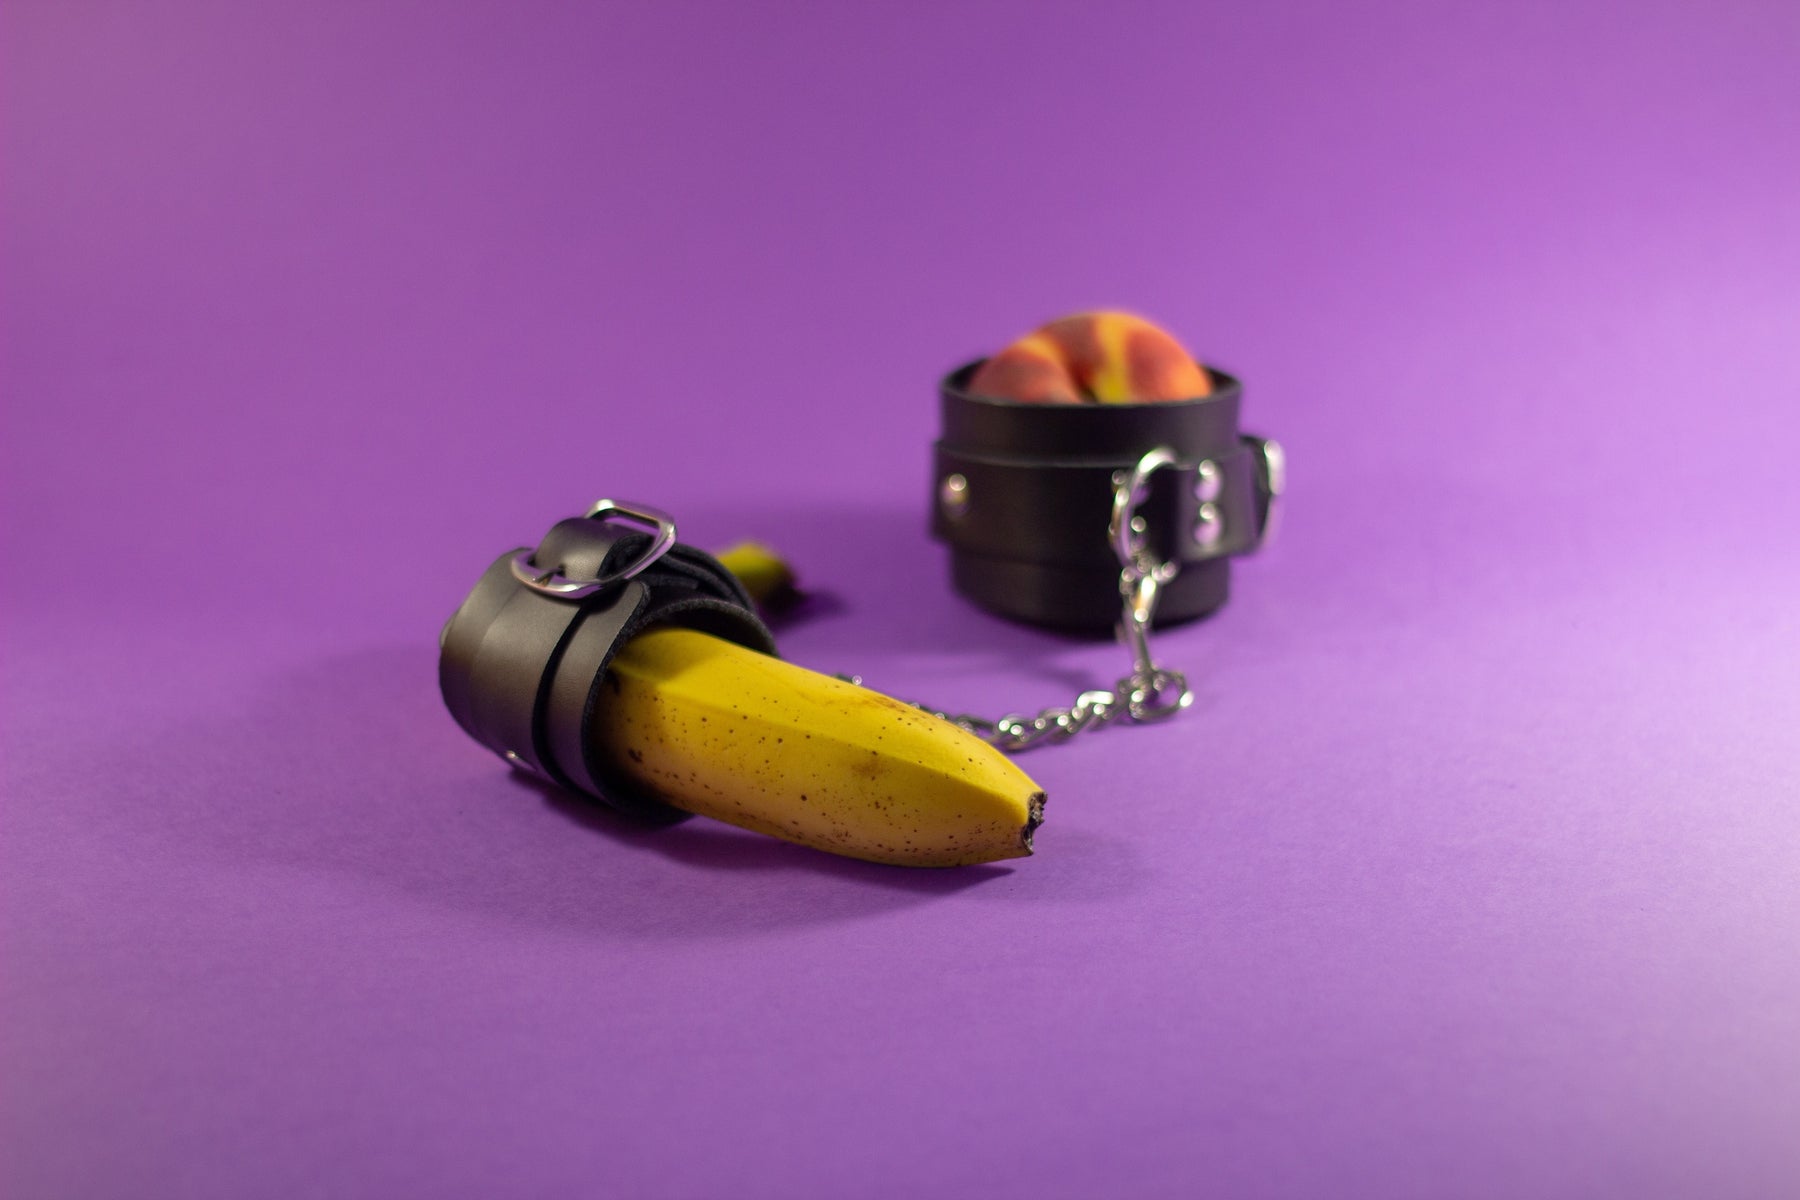 A banana and a peach wearing black restraints on a purple background